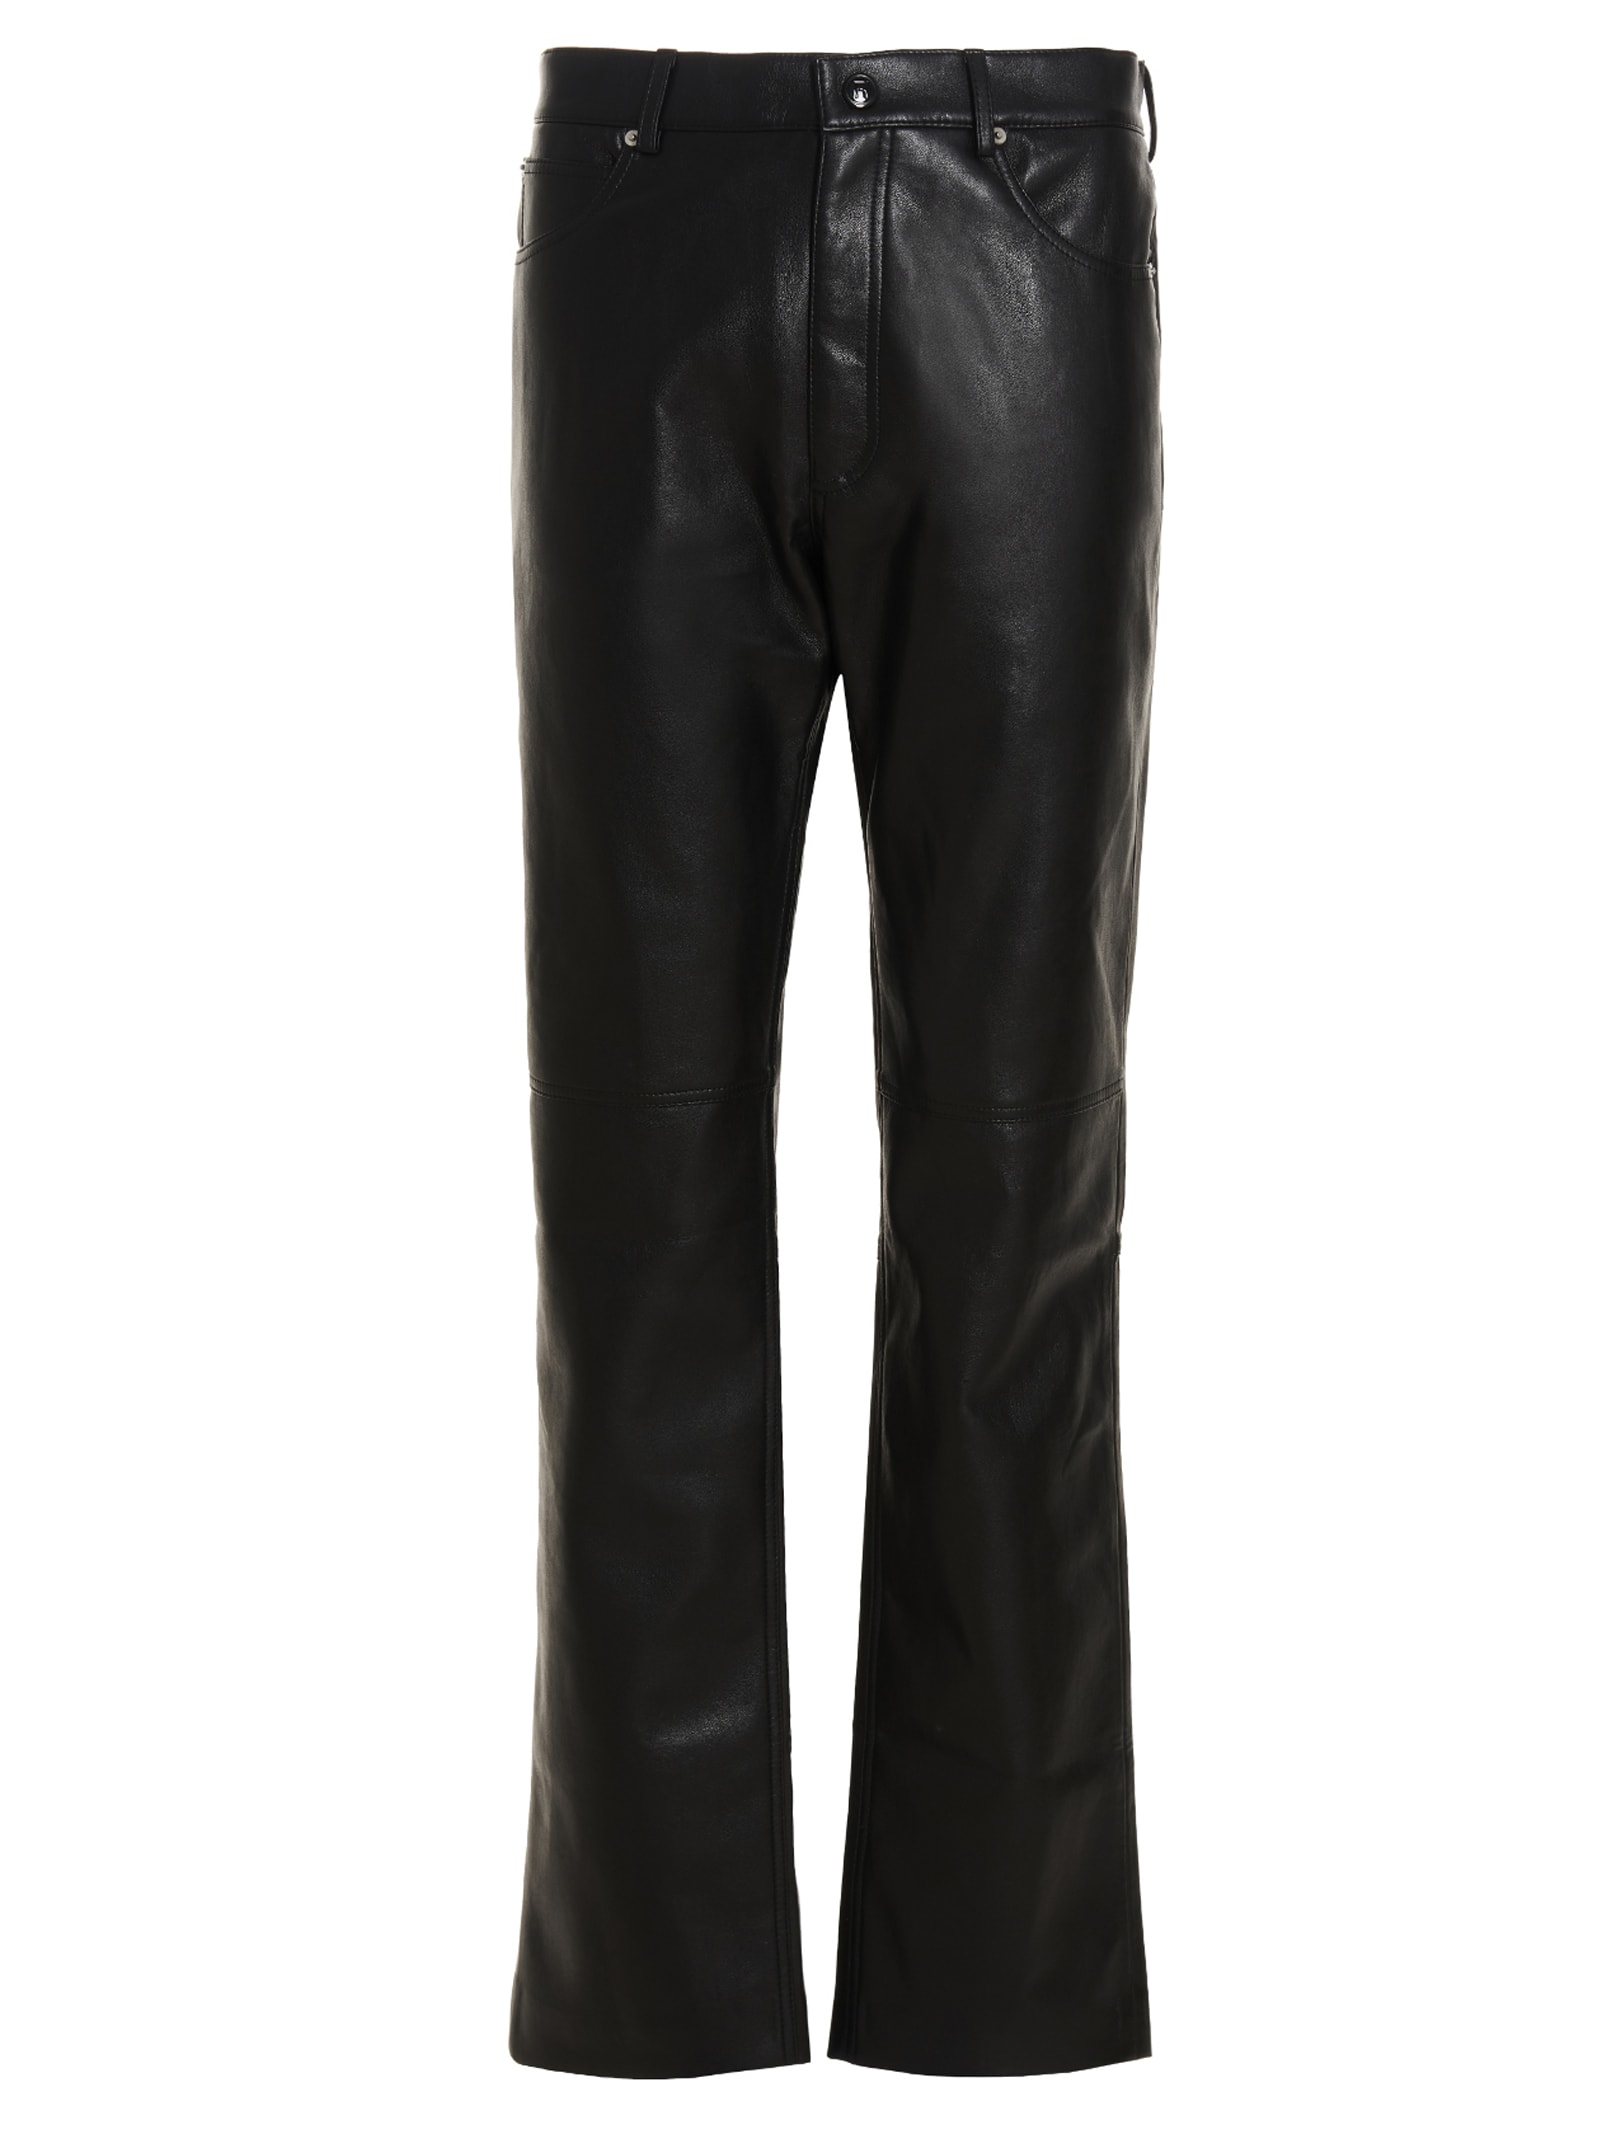 Martine Rose 5-pocket Trousers